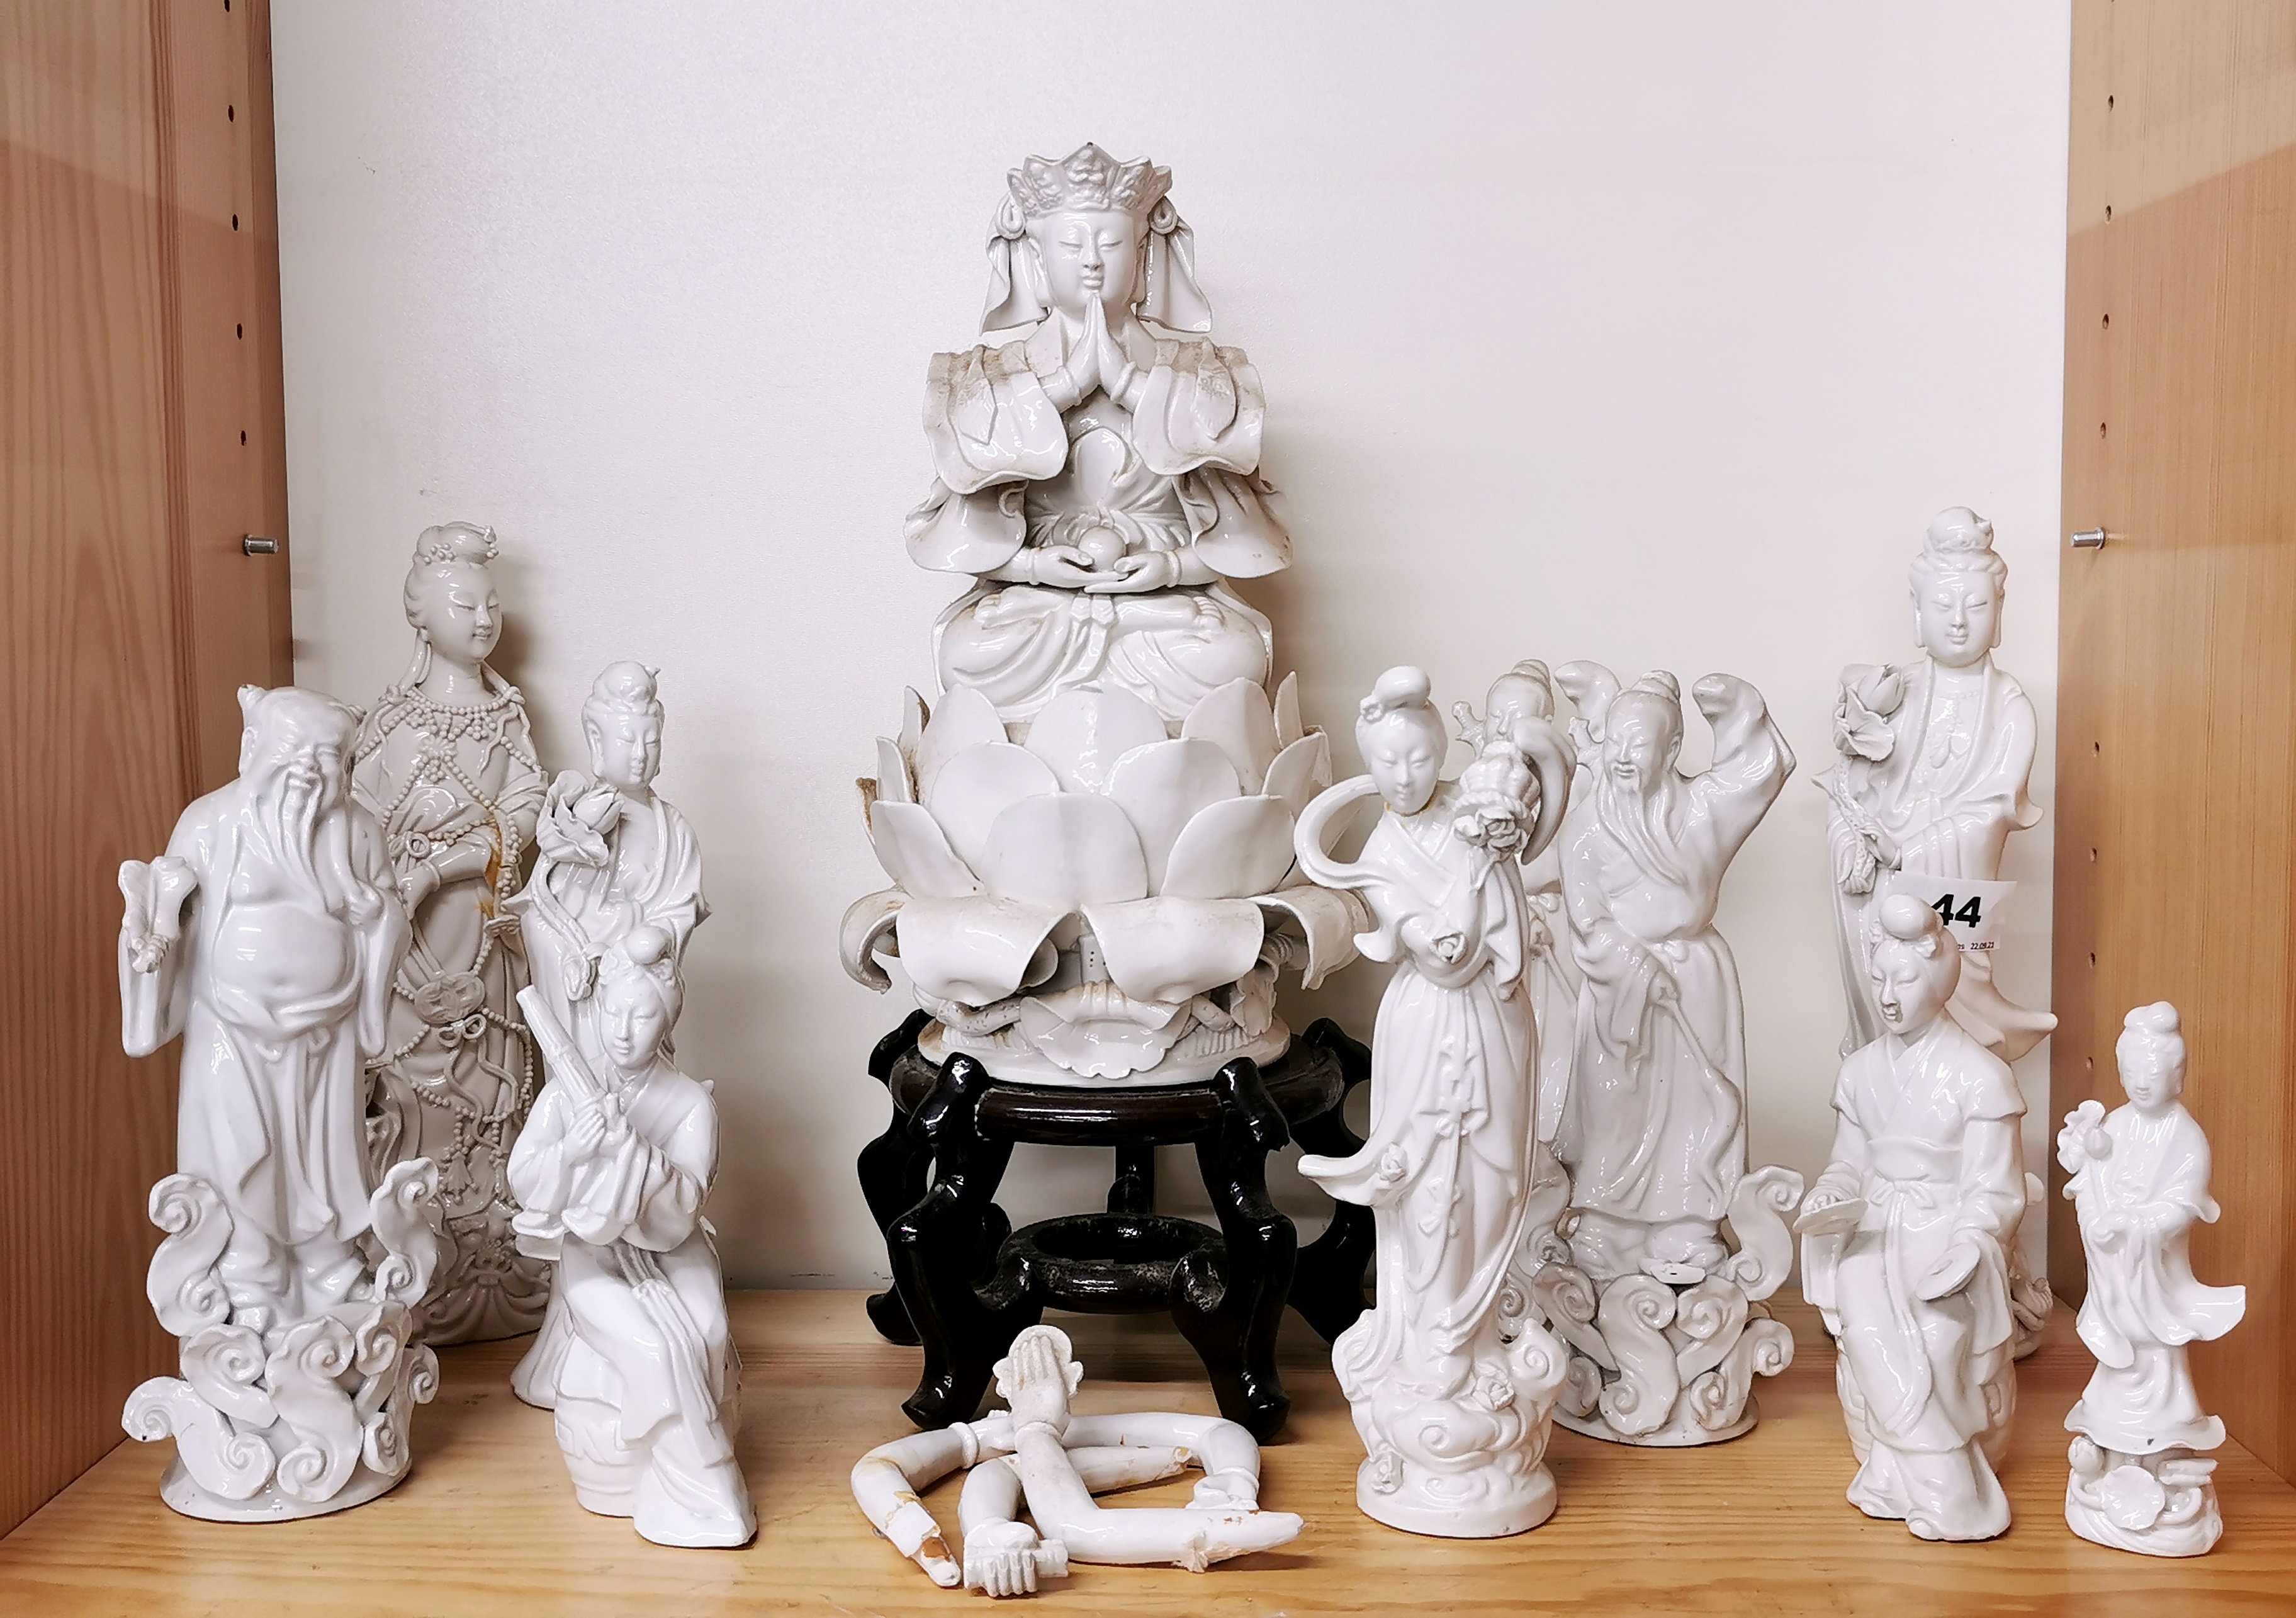 A group of Chinese Blanc de Chine porcelain figures including a deity with loose arms.